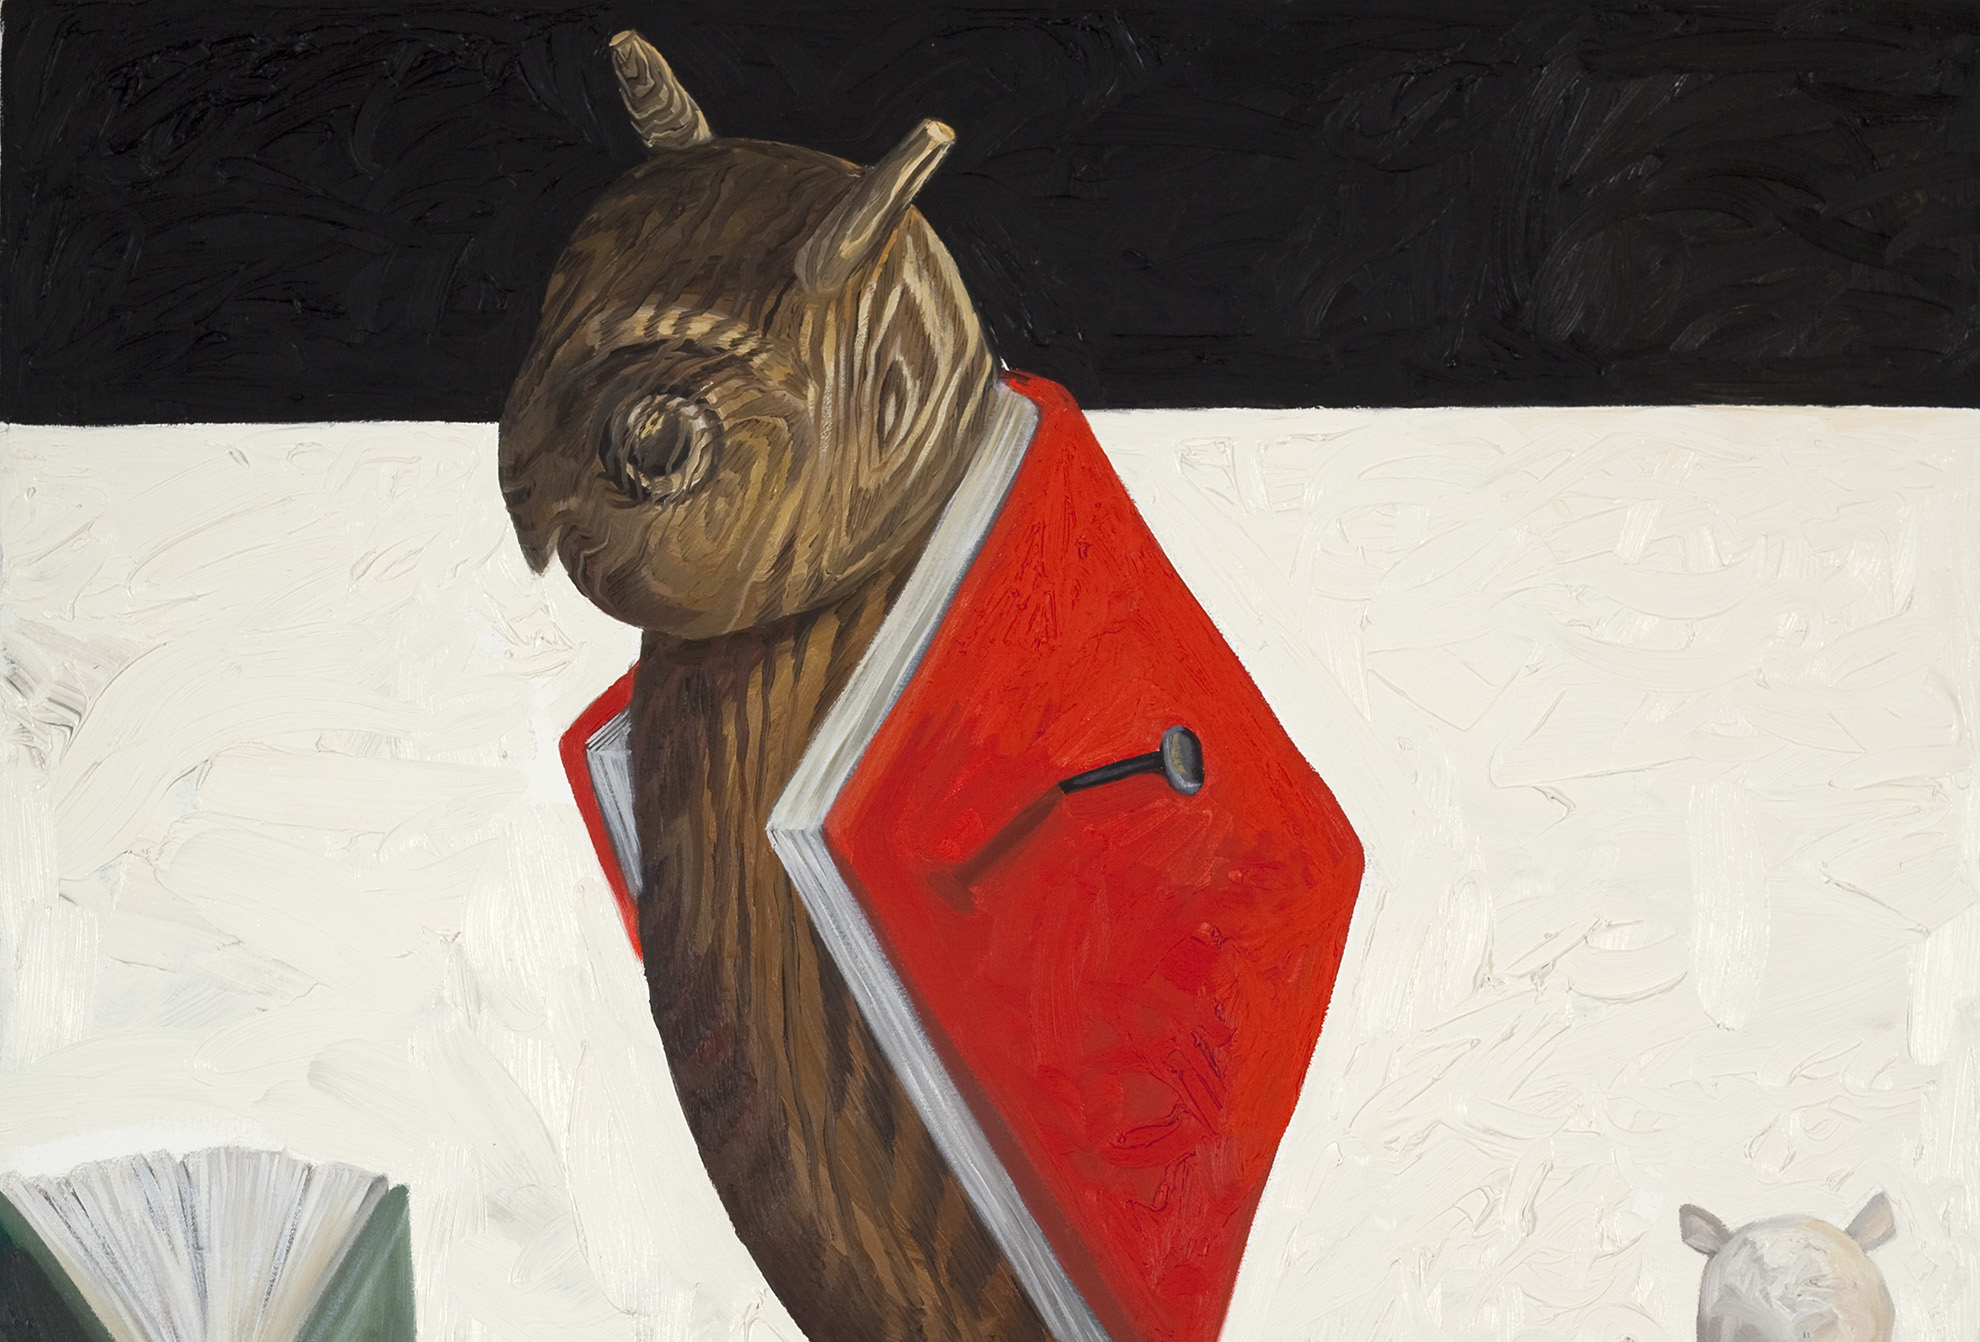 Detail of "Wooden Owl" (1991) by Cheryl Laemmle (b. 1947), oil on canvas, 40 x 35 x 1 3/4 in. (101.6 x 88.9 x 4.4 cm), The Vogel Collection, 2008.12.36.